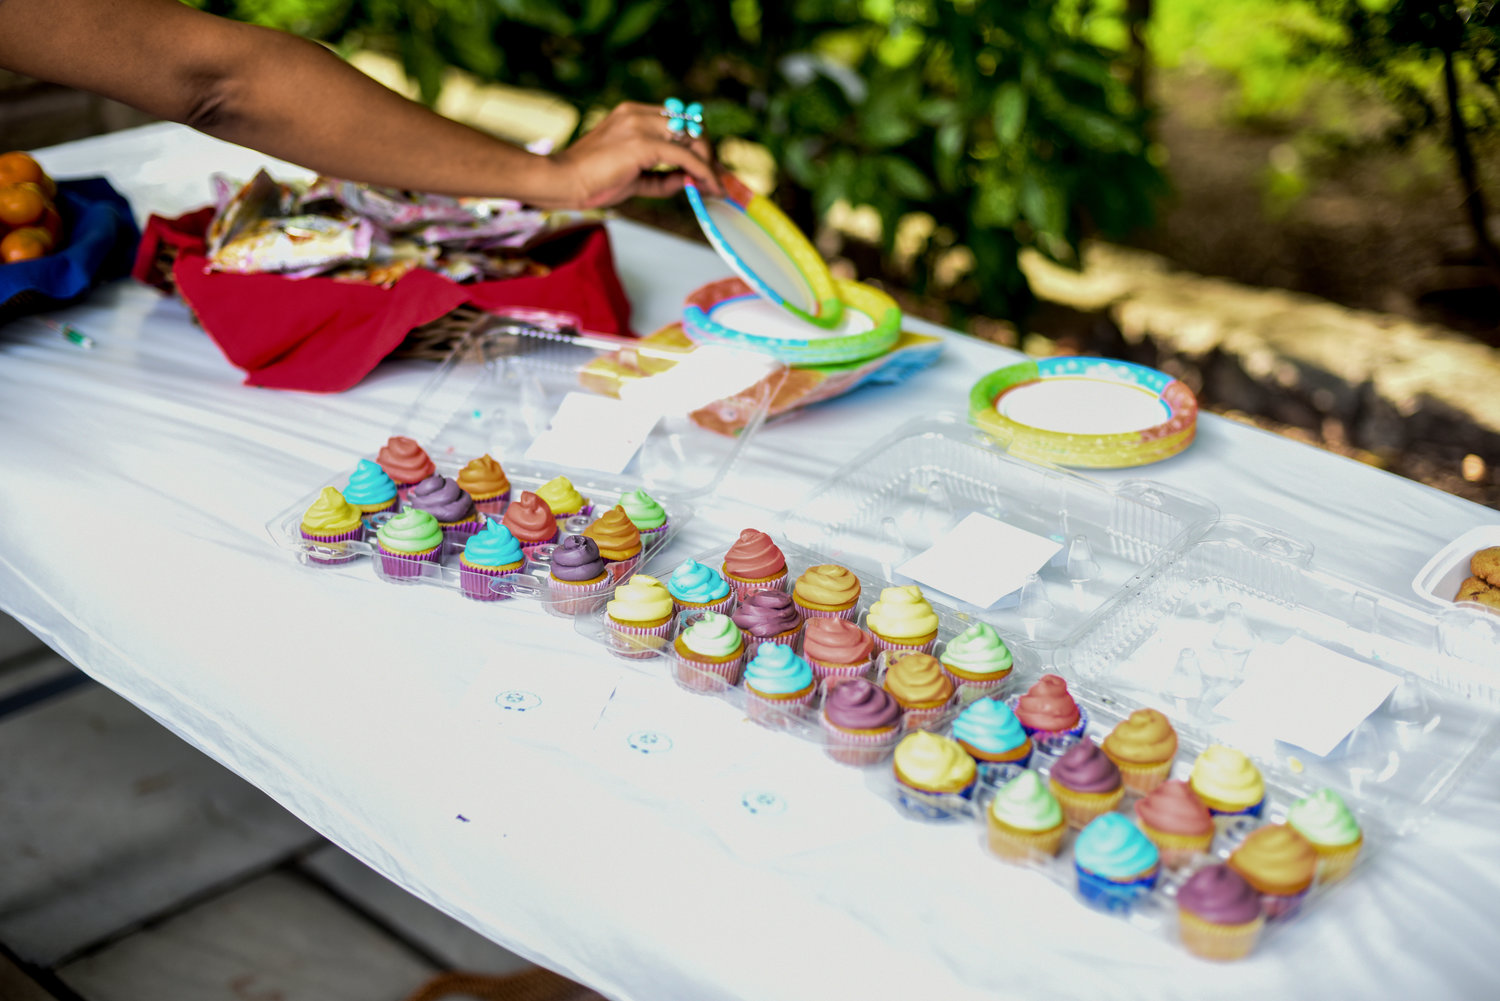 Lucy Kassel has been made cupcakes for various events locally, such as last summer’s Pride Shabbat at the Riverdale Temple. She also made her popular treats for birthday parties and gatherings at places like the Professional Performing Arts School, where she’s focused on drama.